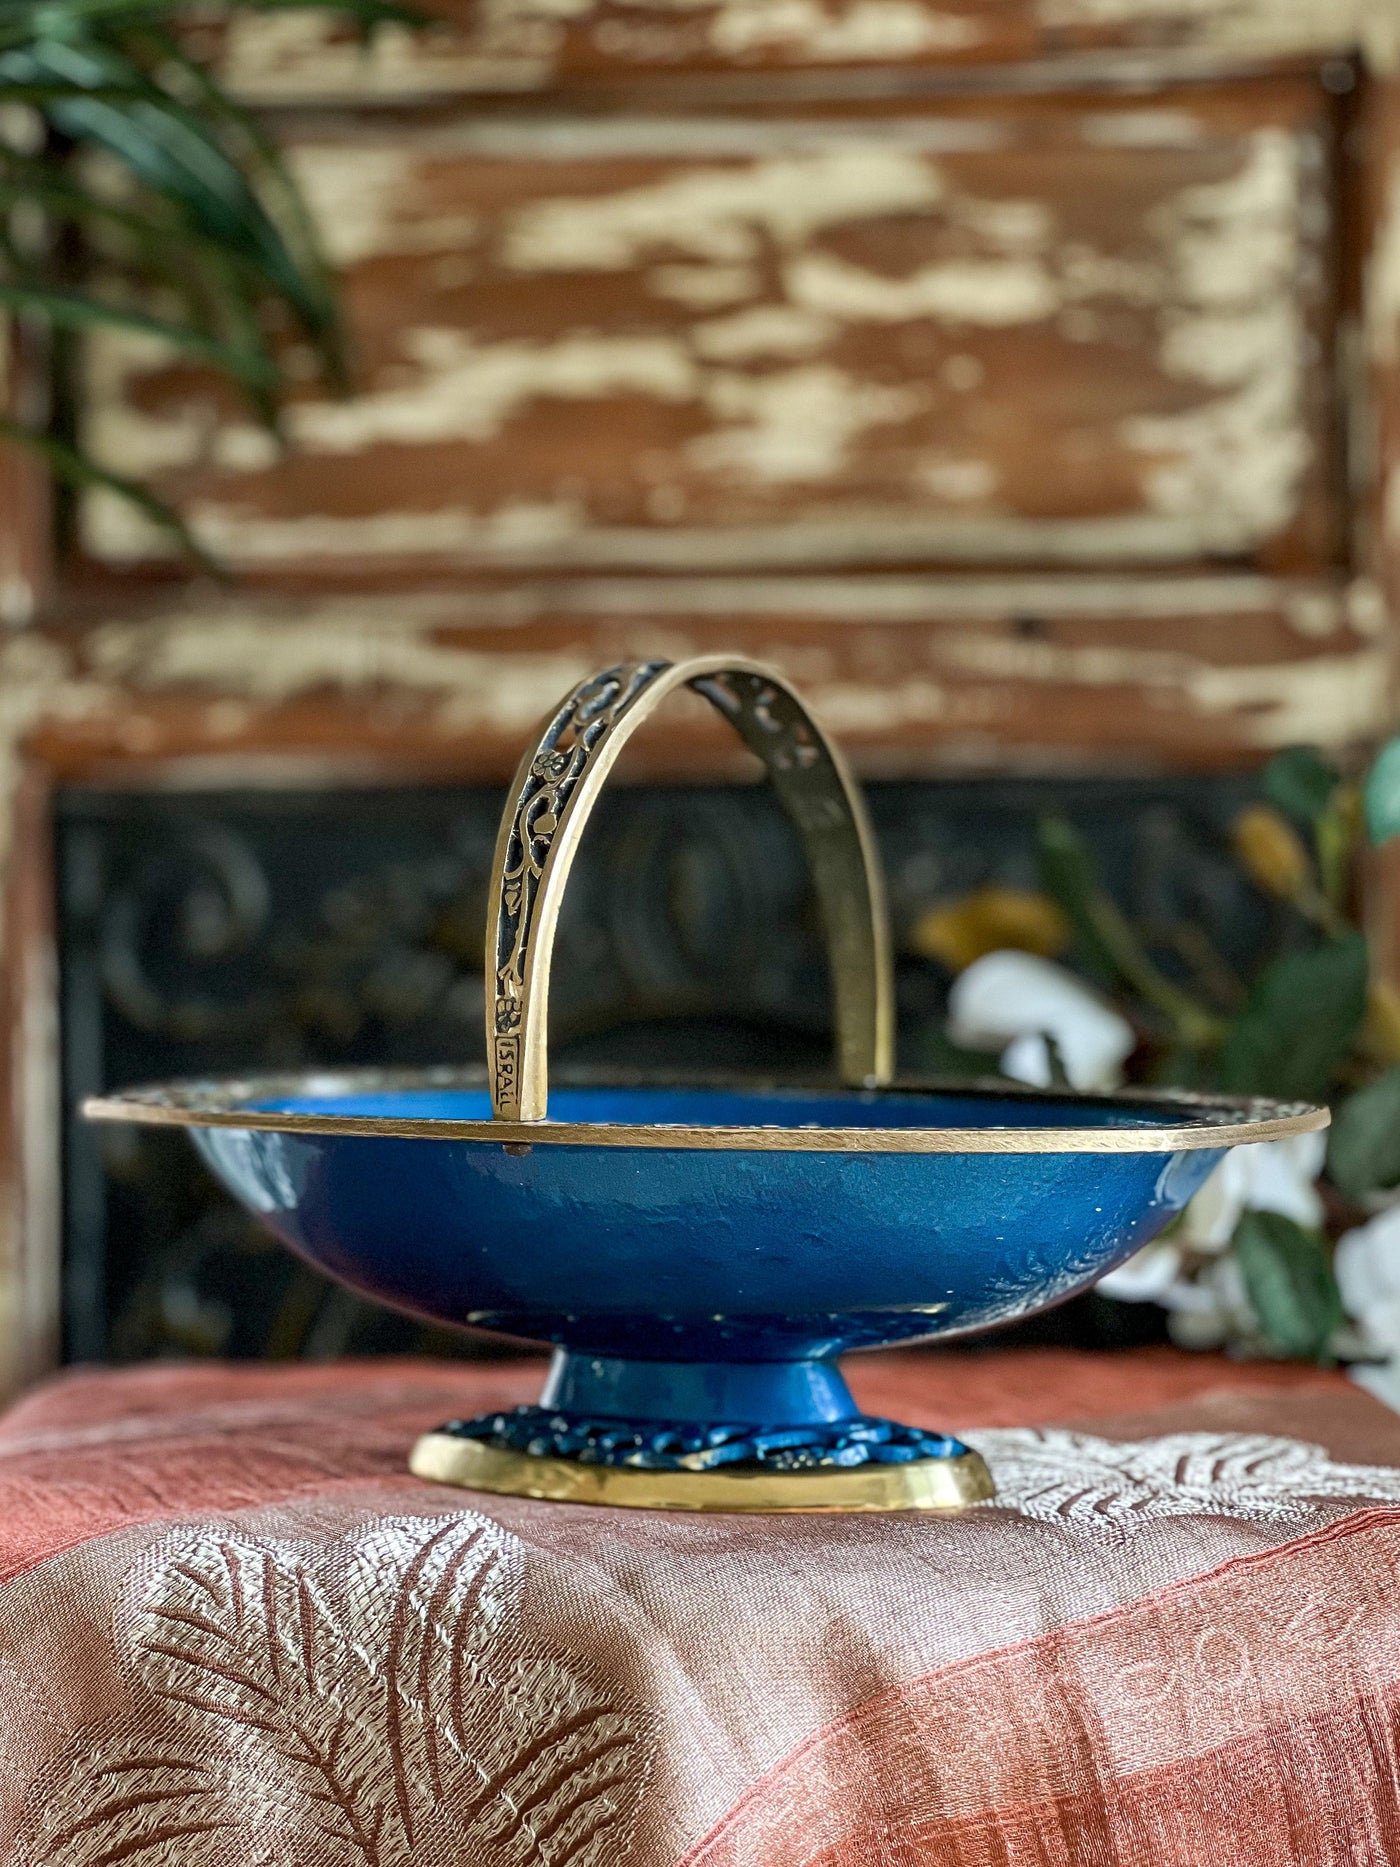 BLUE ENAMEL & BRASS BOWL WITH HANDLE & MOSAIC RIM Revive In Style Vintage Furniture Painted Refinished Redesign Beautiful One of a Kind Artistic Antique Unique Home Decor Interior Design French Country Shabby Chic Cottage Farmhouse Grandmillenial Coastal Chalk Paint Metallic Glam Eclectic Quality Dovetailed Rustic Furniture Painter Pinterest Bedroom Living Room Entryway Kitchen Home Trends House Styles Decorating ideas